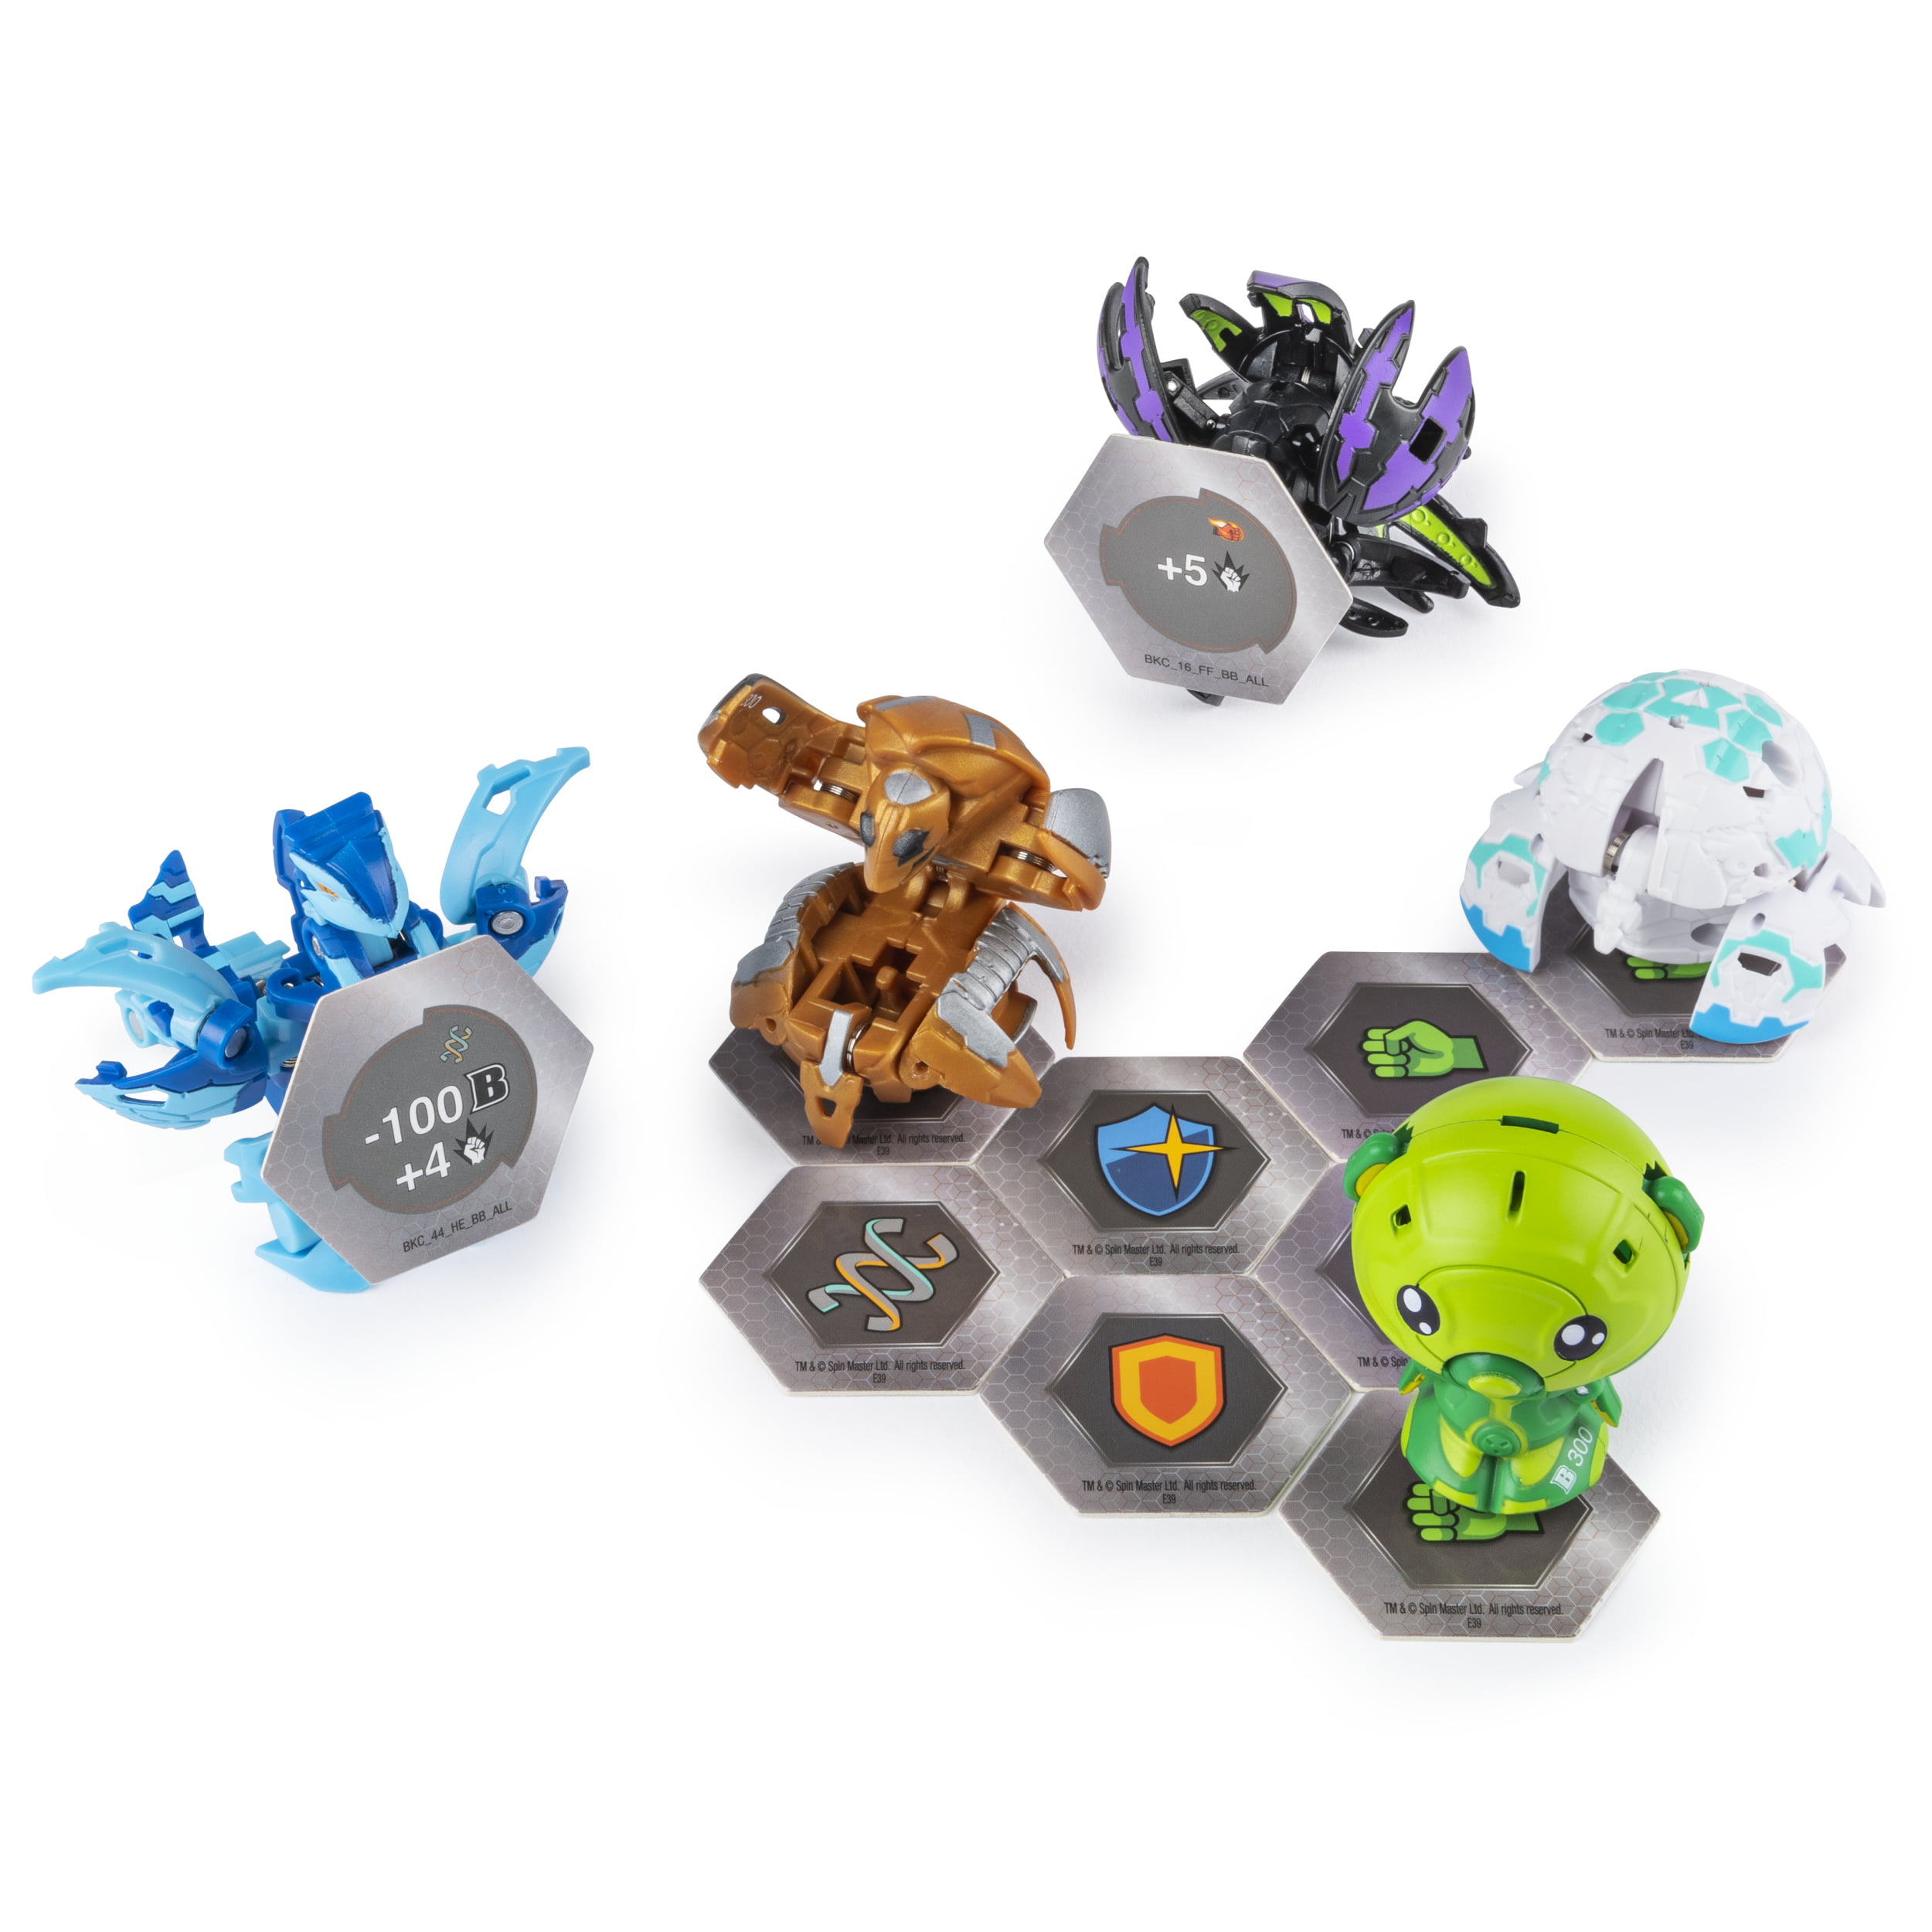 Bakugan, Battle Pack 5-Pack, Aquos Nobilious and Darkus Krakelios,  Collectible Cards and Figures, for Ages 6 and up